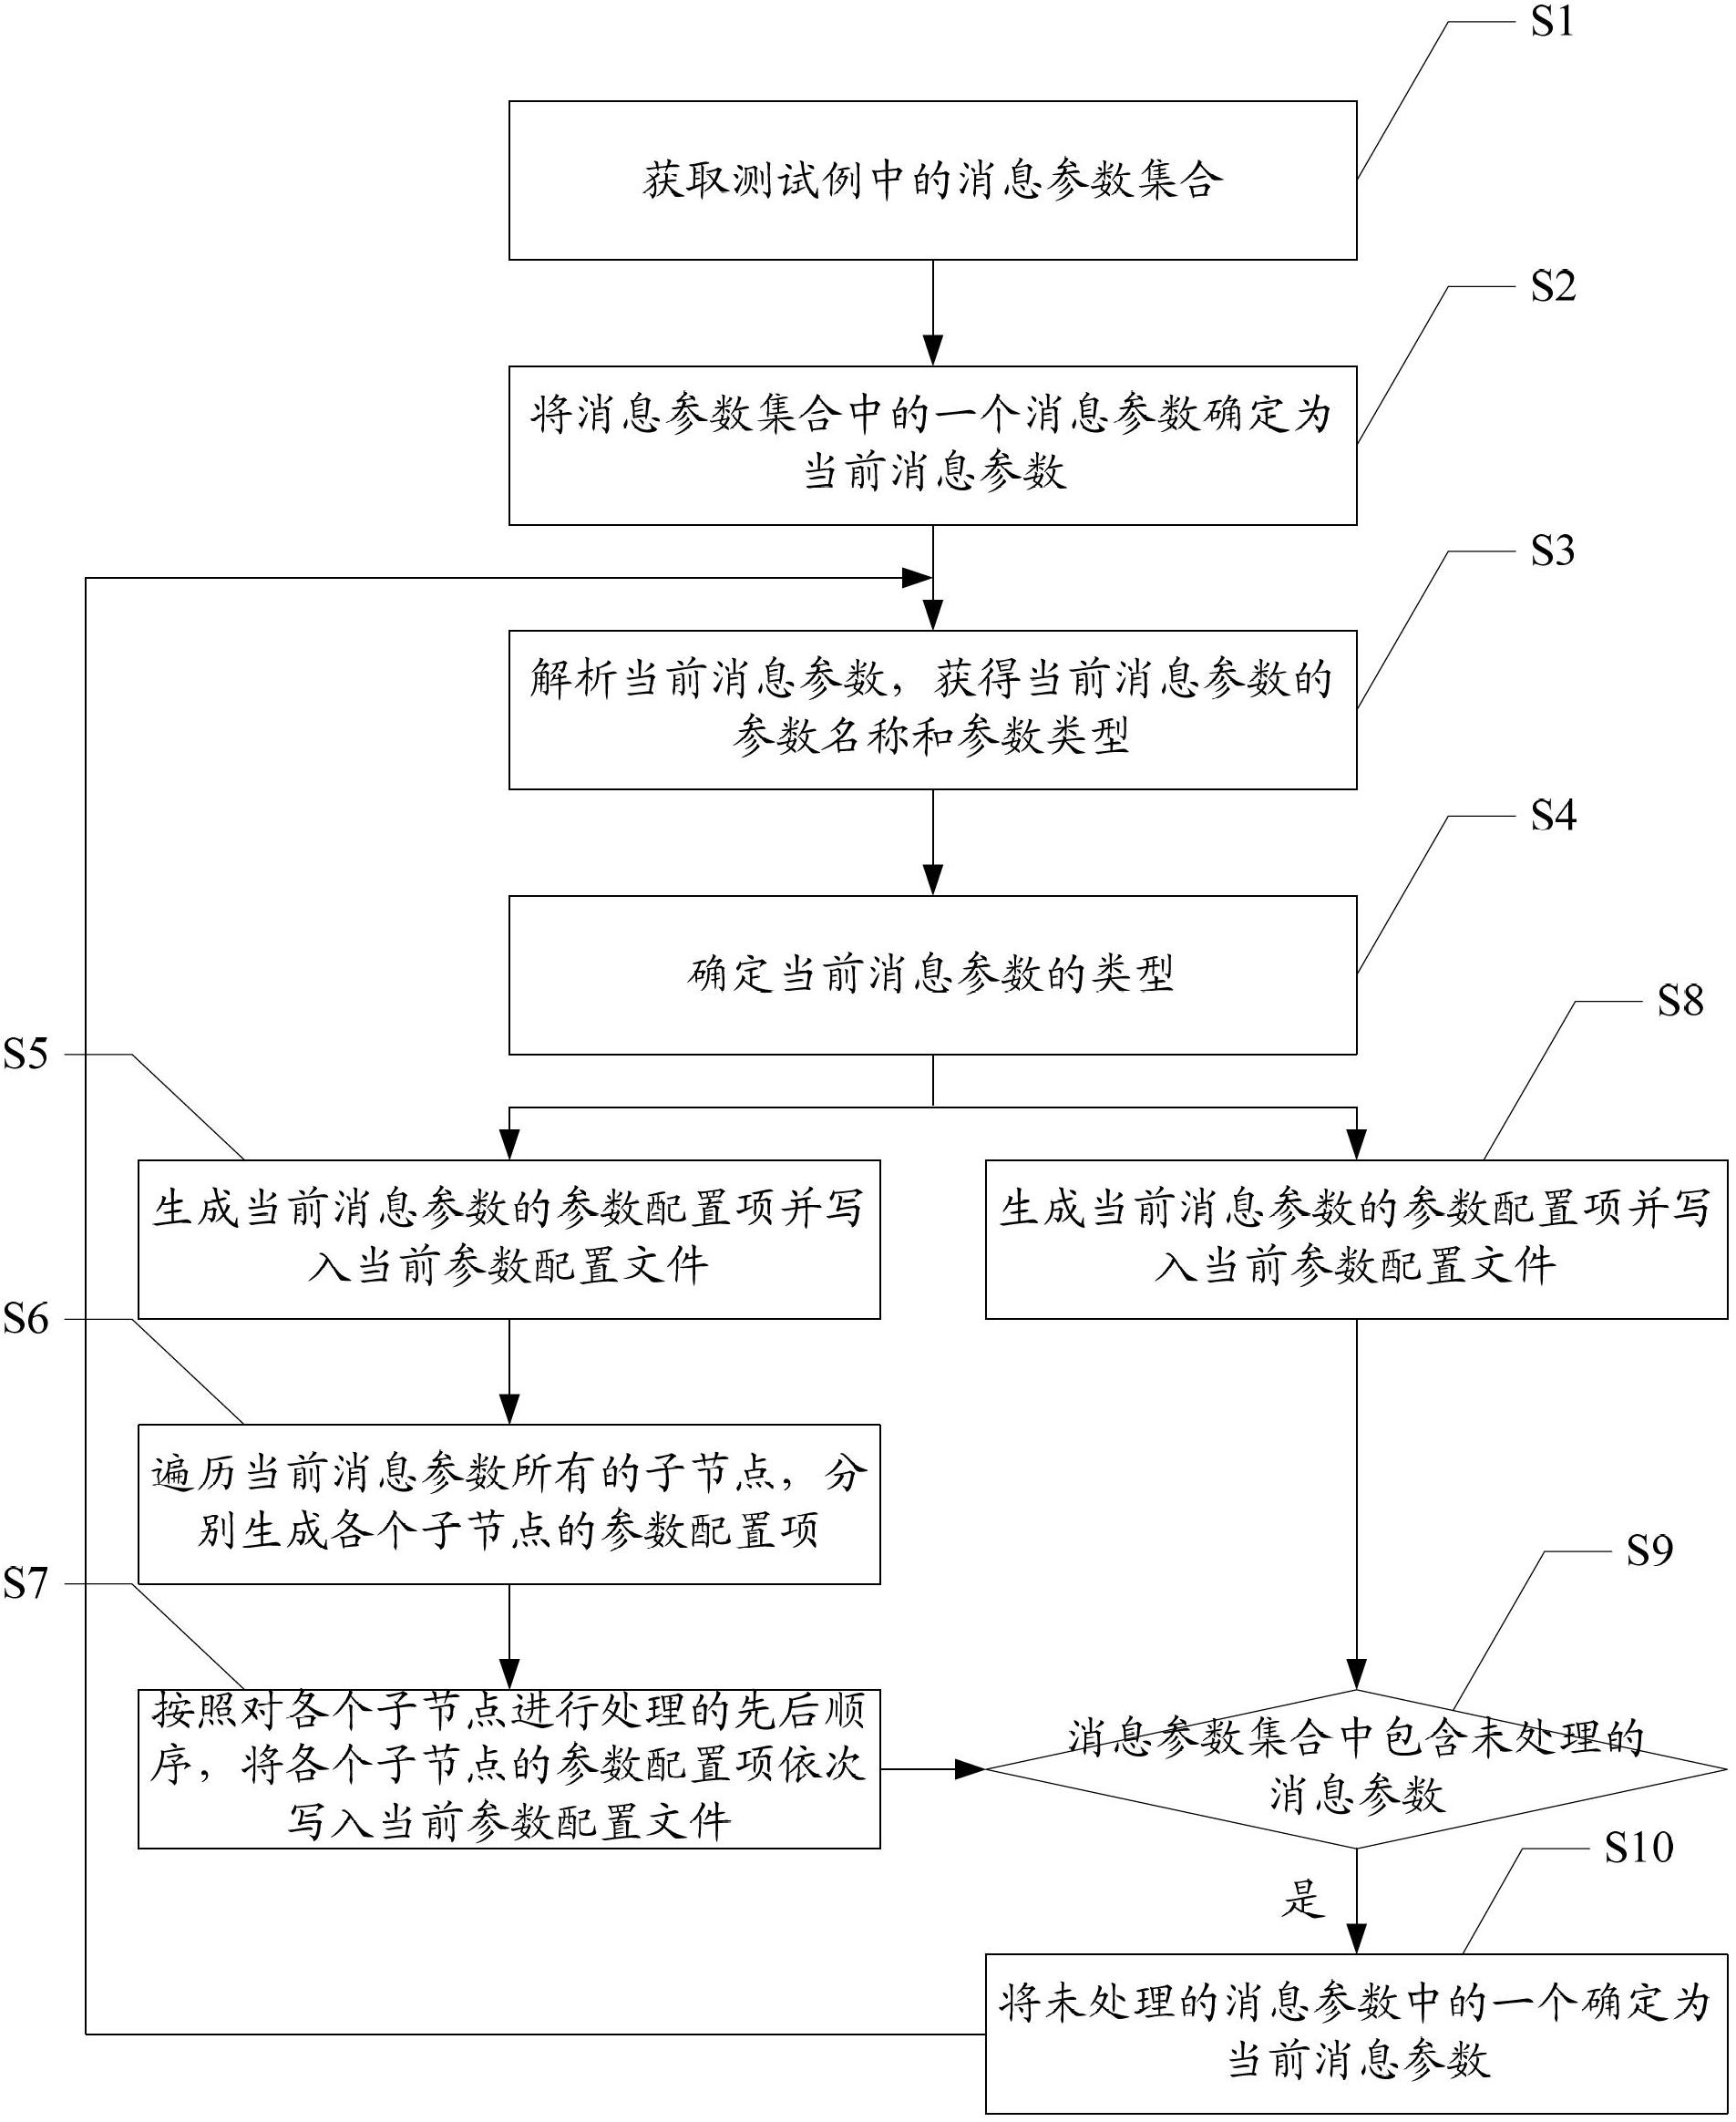 Method of automatically generating parameter configuration file for LTE (Long Term Evolution) system